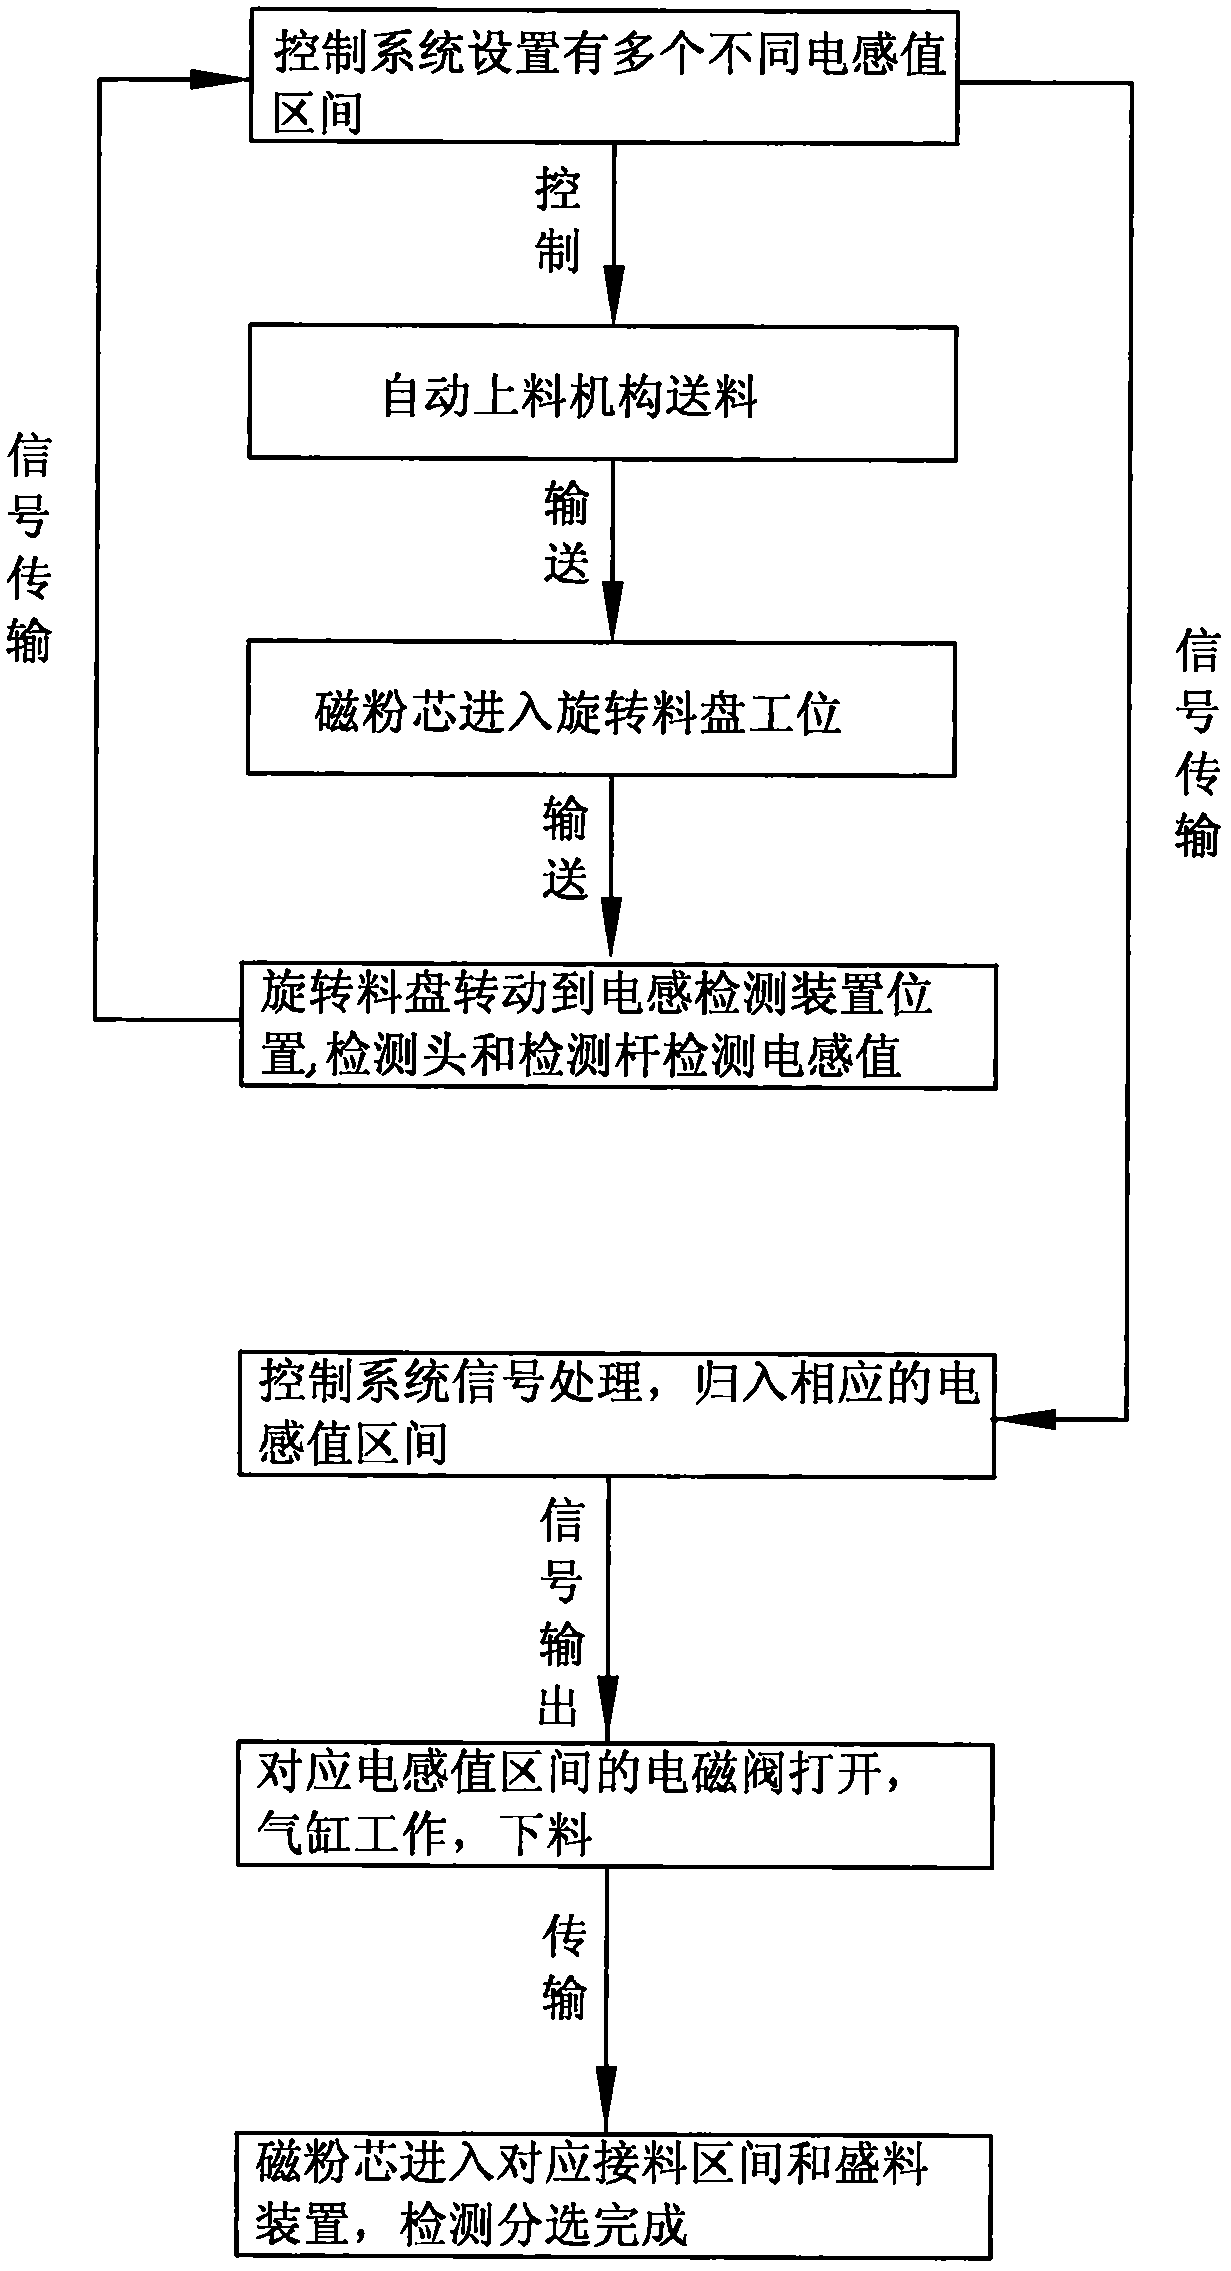 Device and method for detecting and sorting sendust magnetic powder core inductance